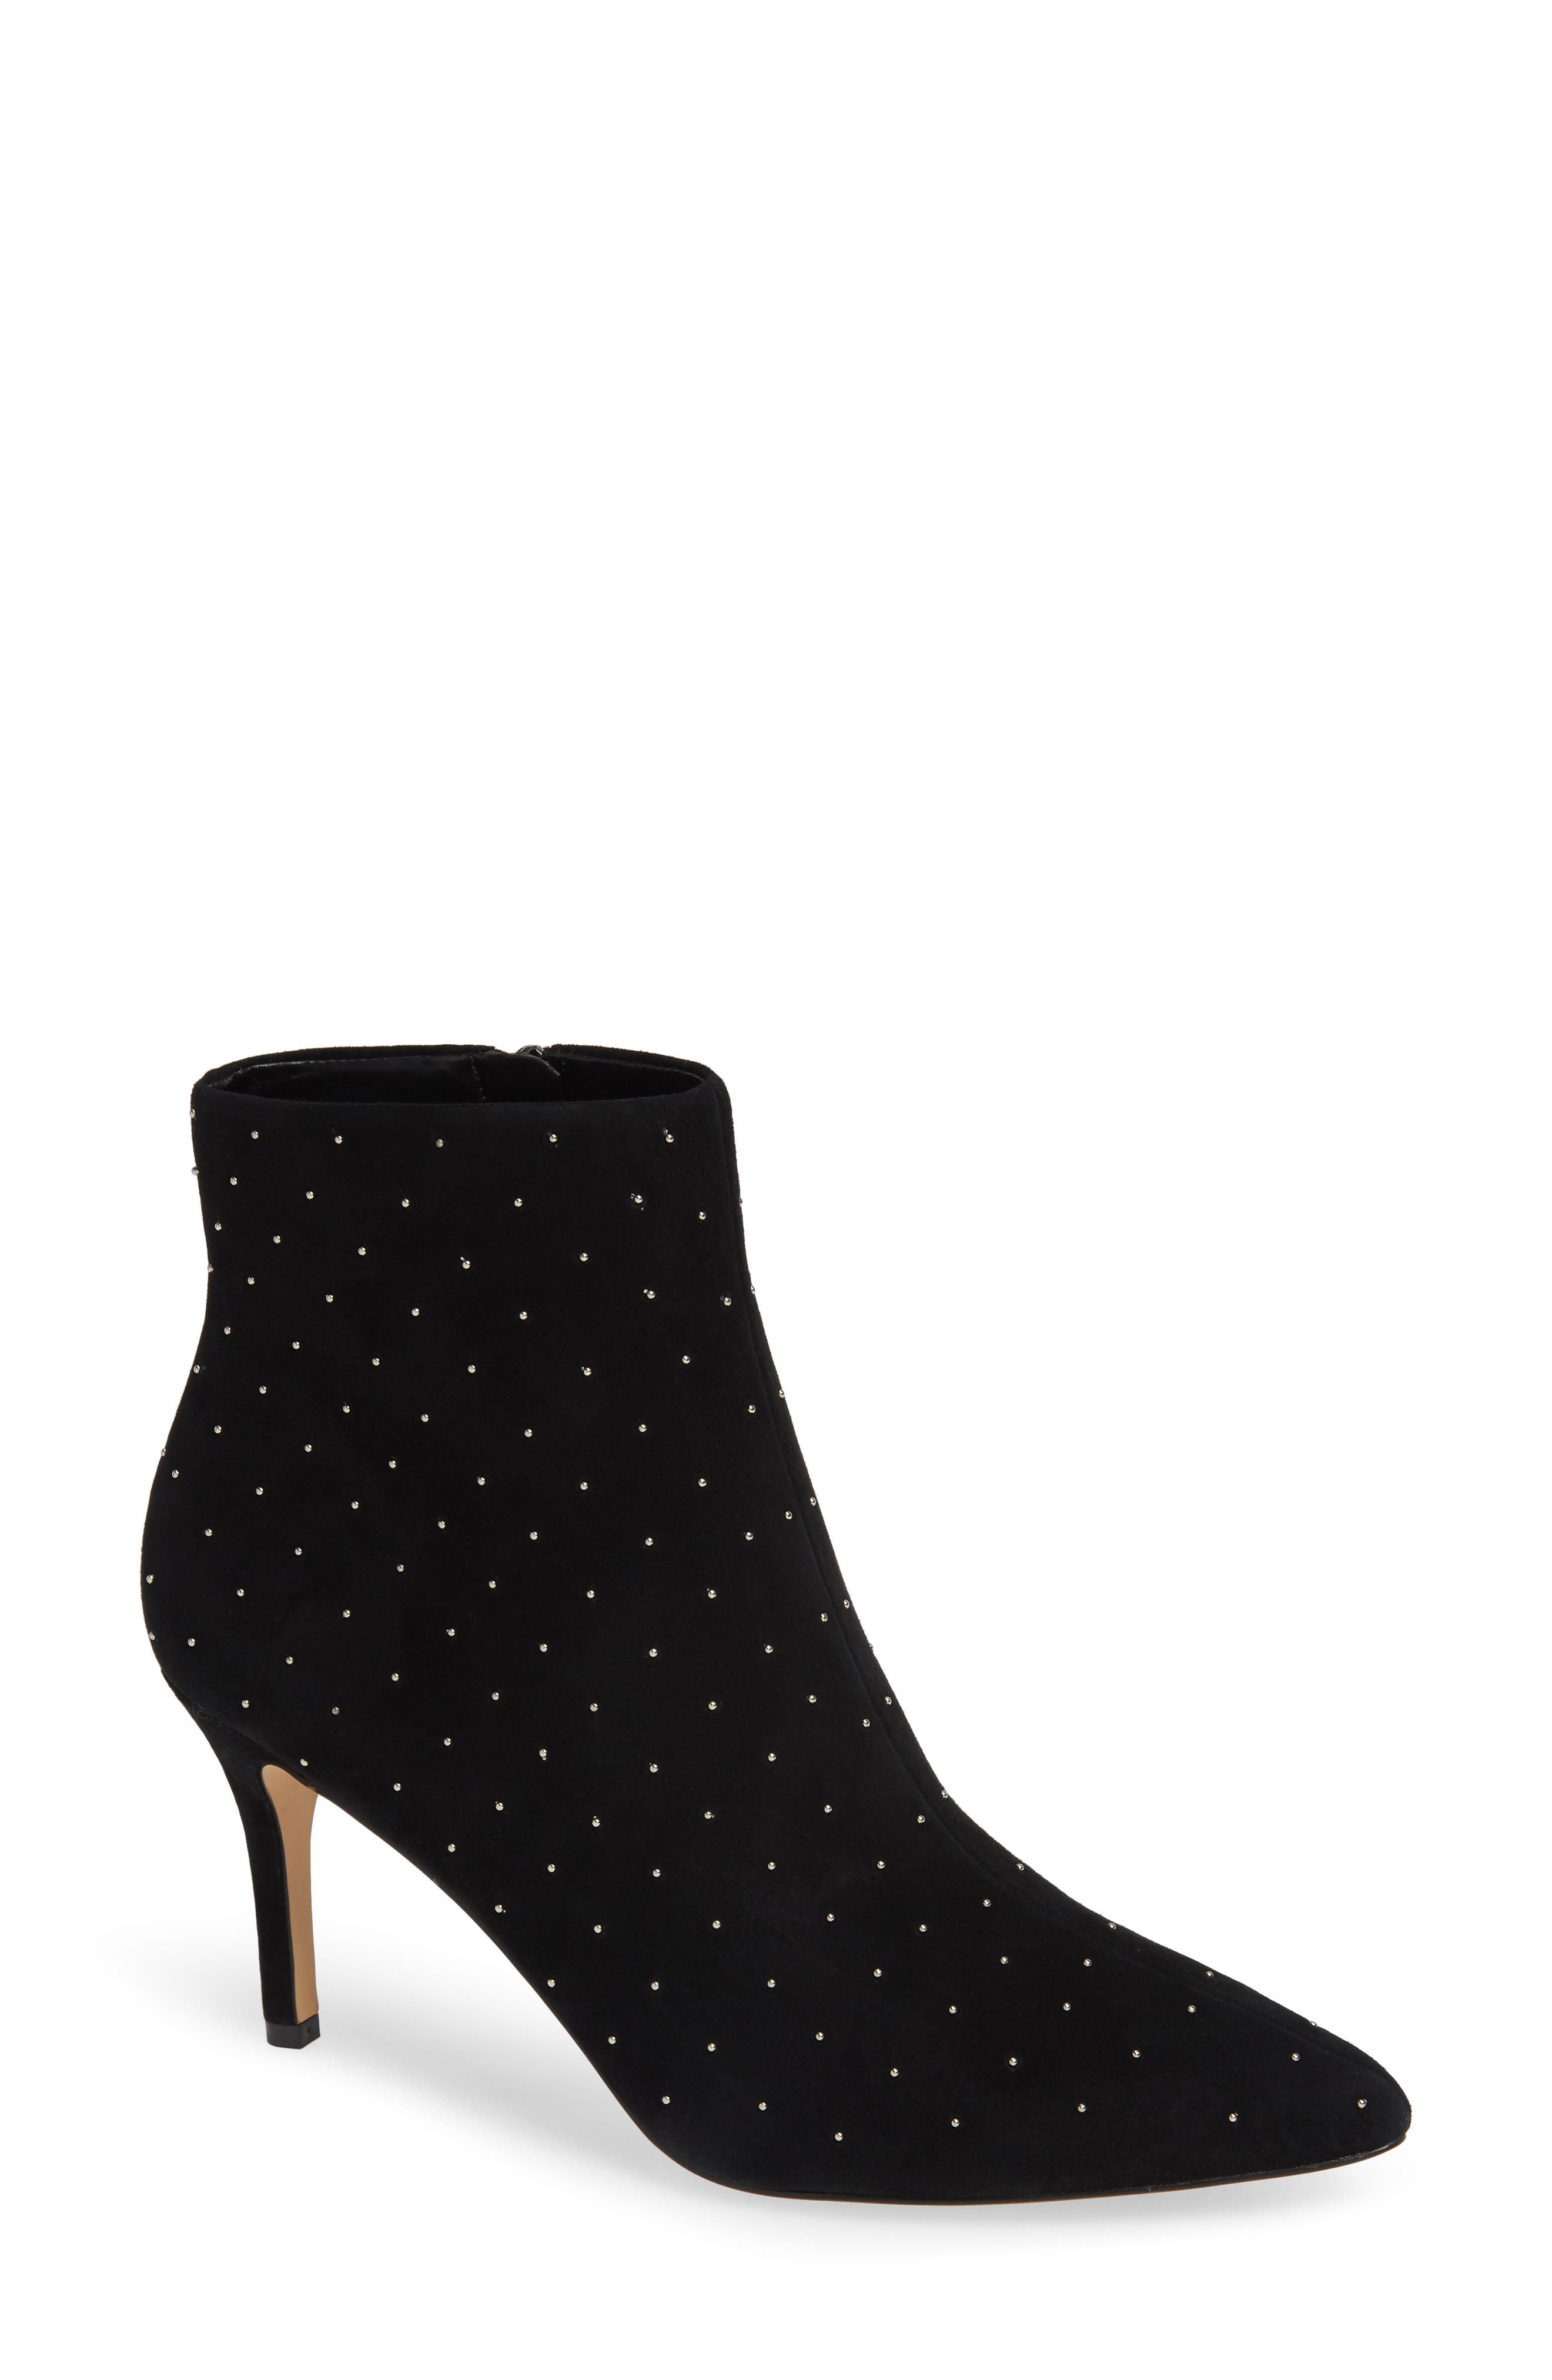 nordstrom studded booties